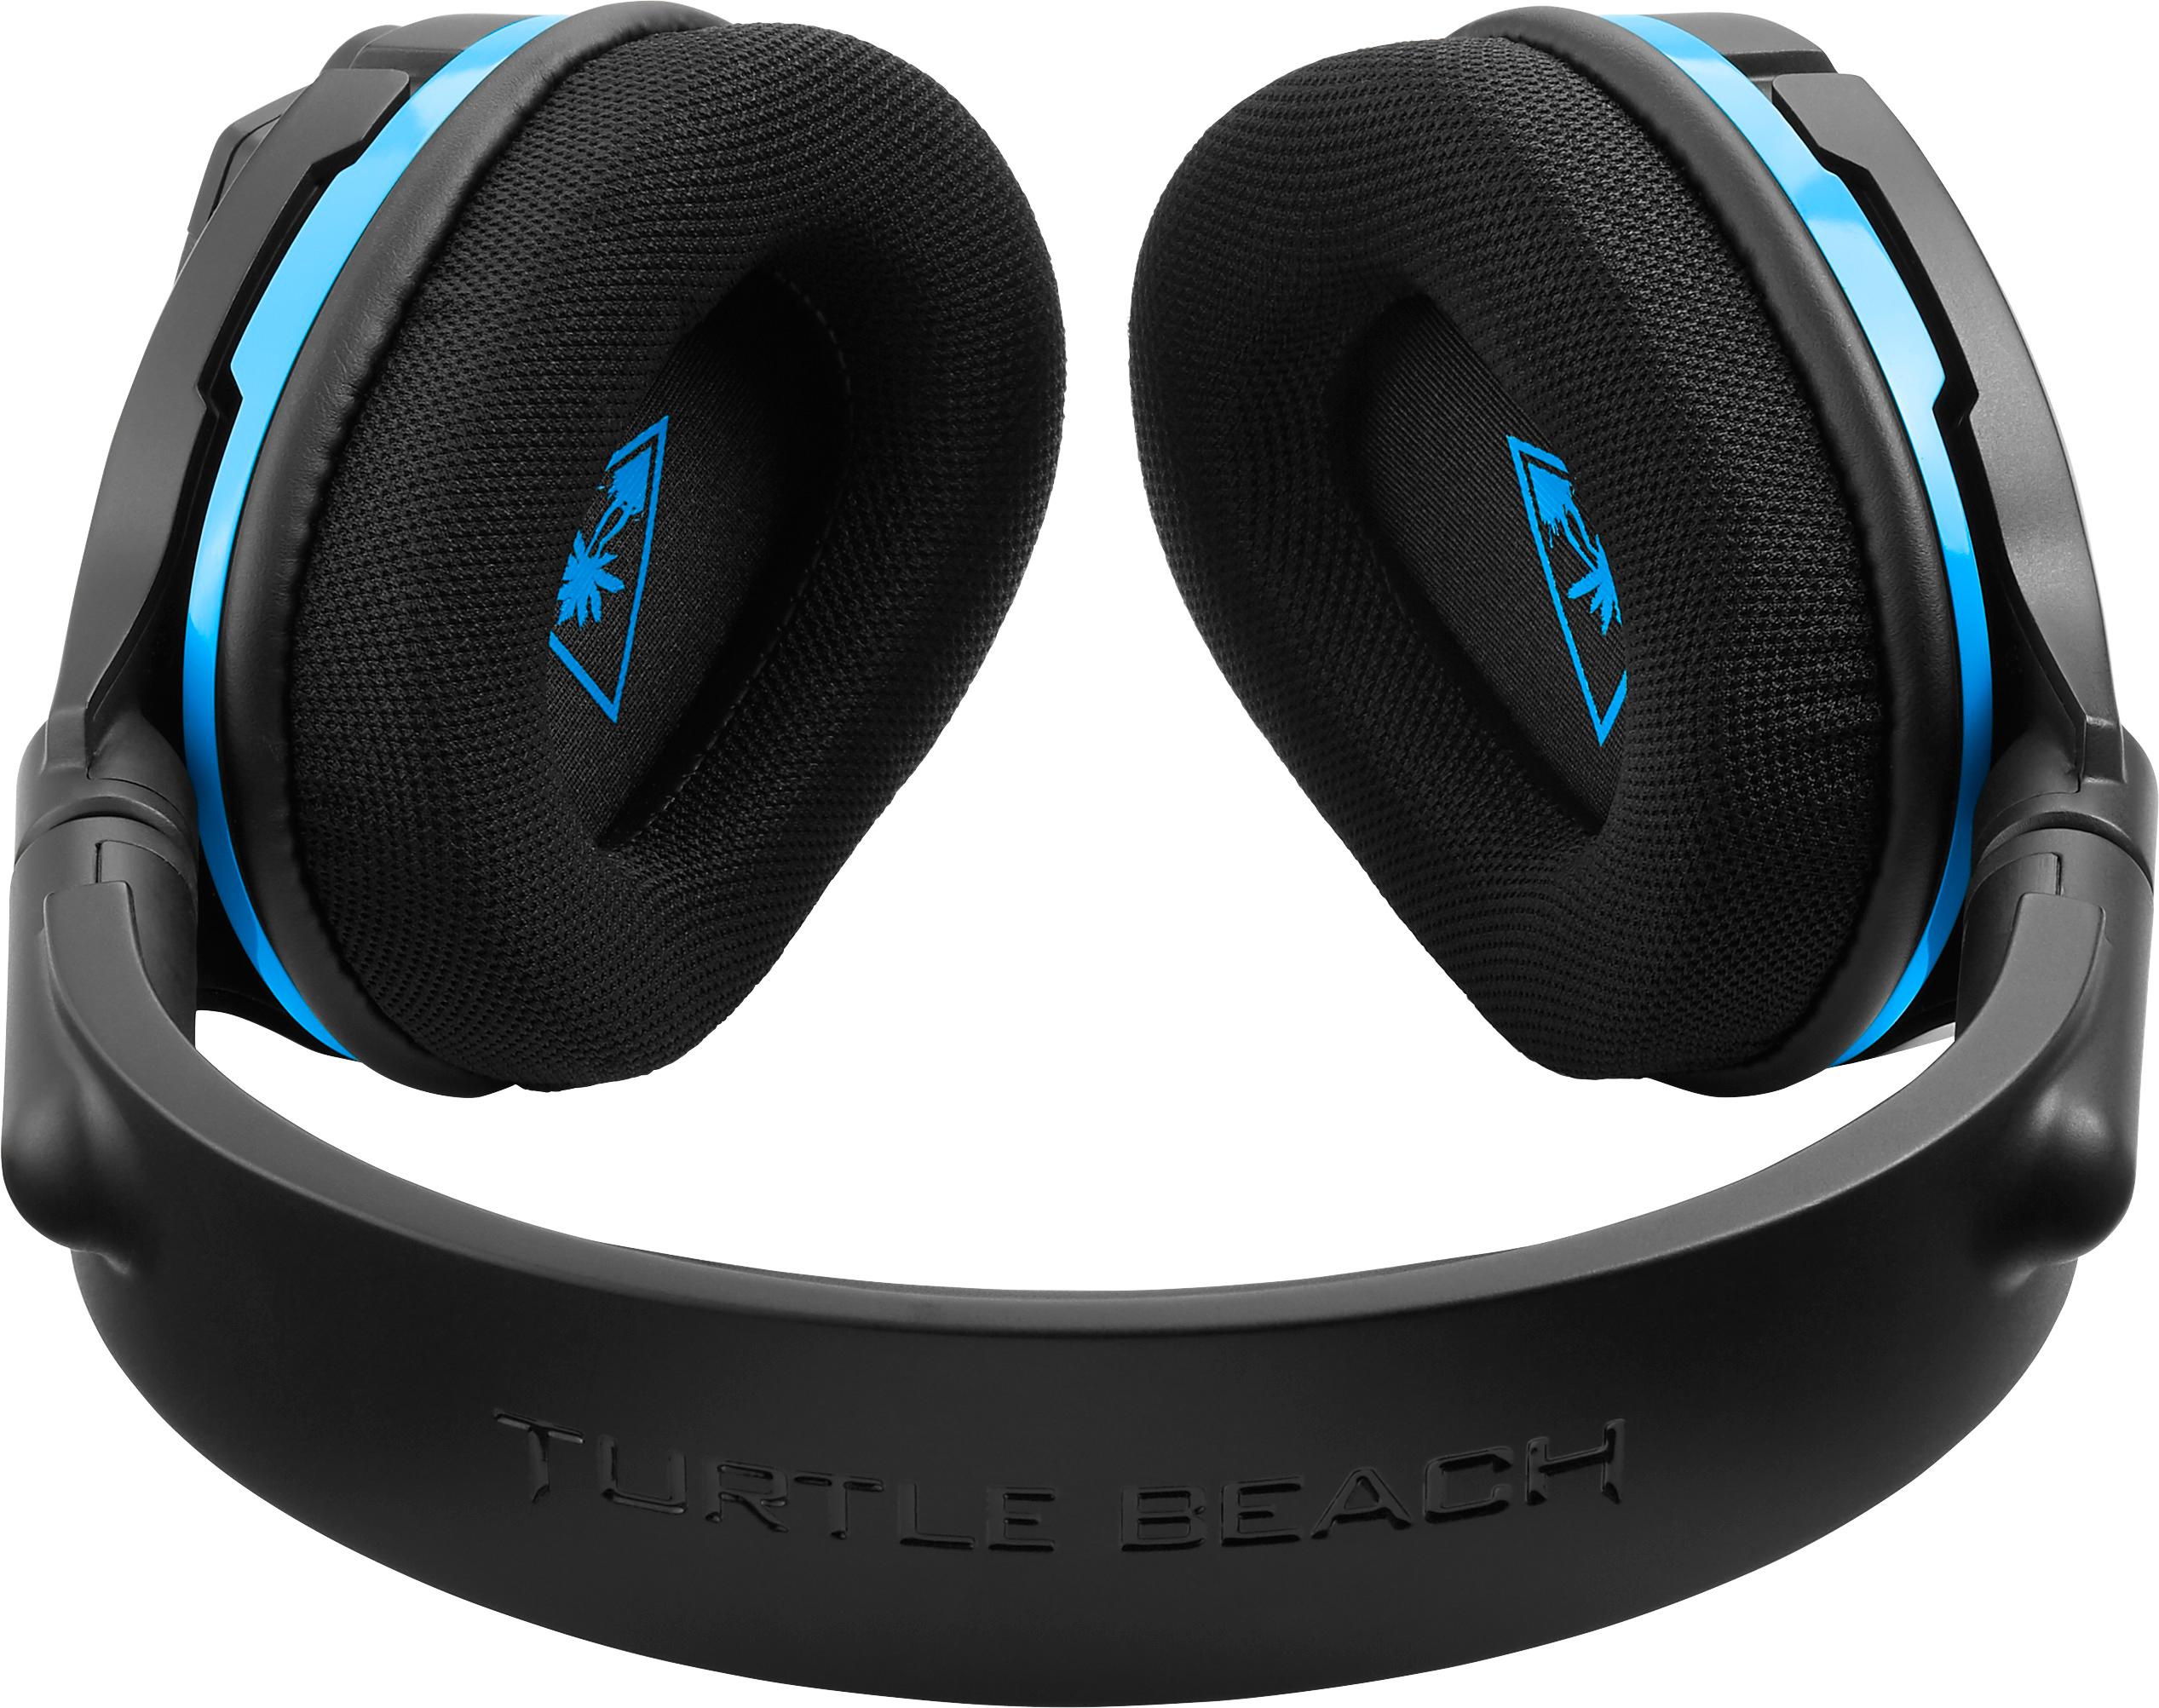 Questions And Answers Turtle Beach Stealth Wireless Surround Sound